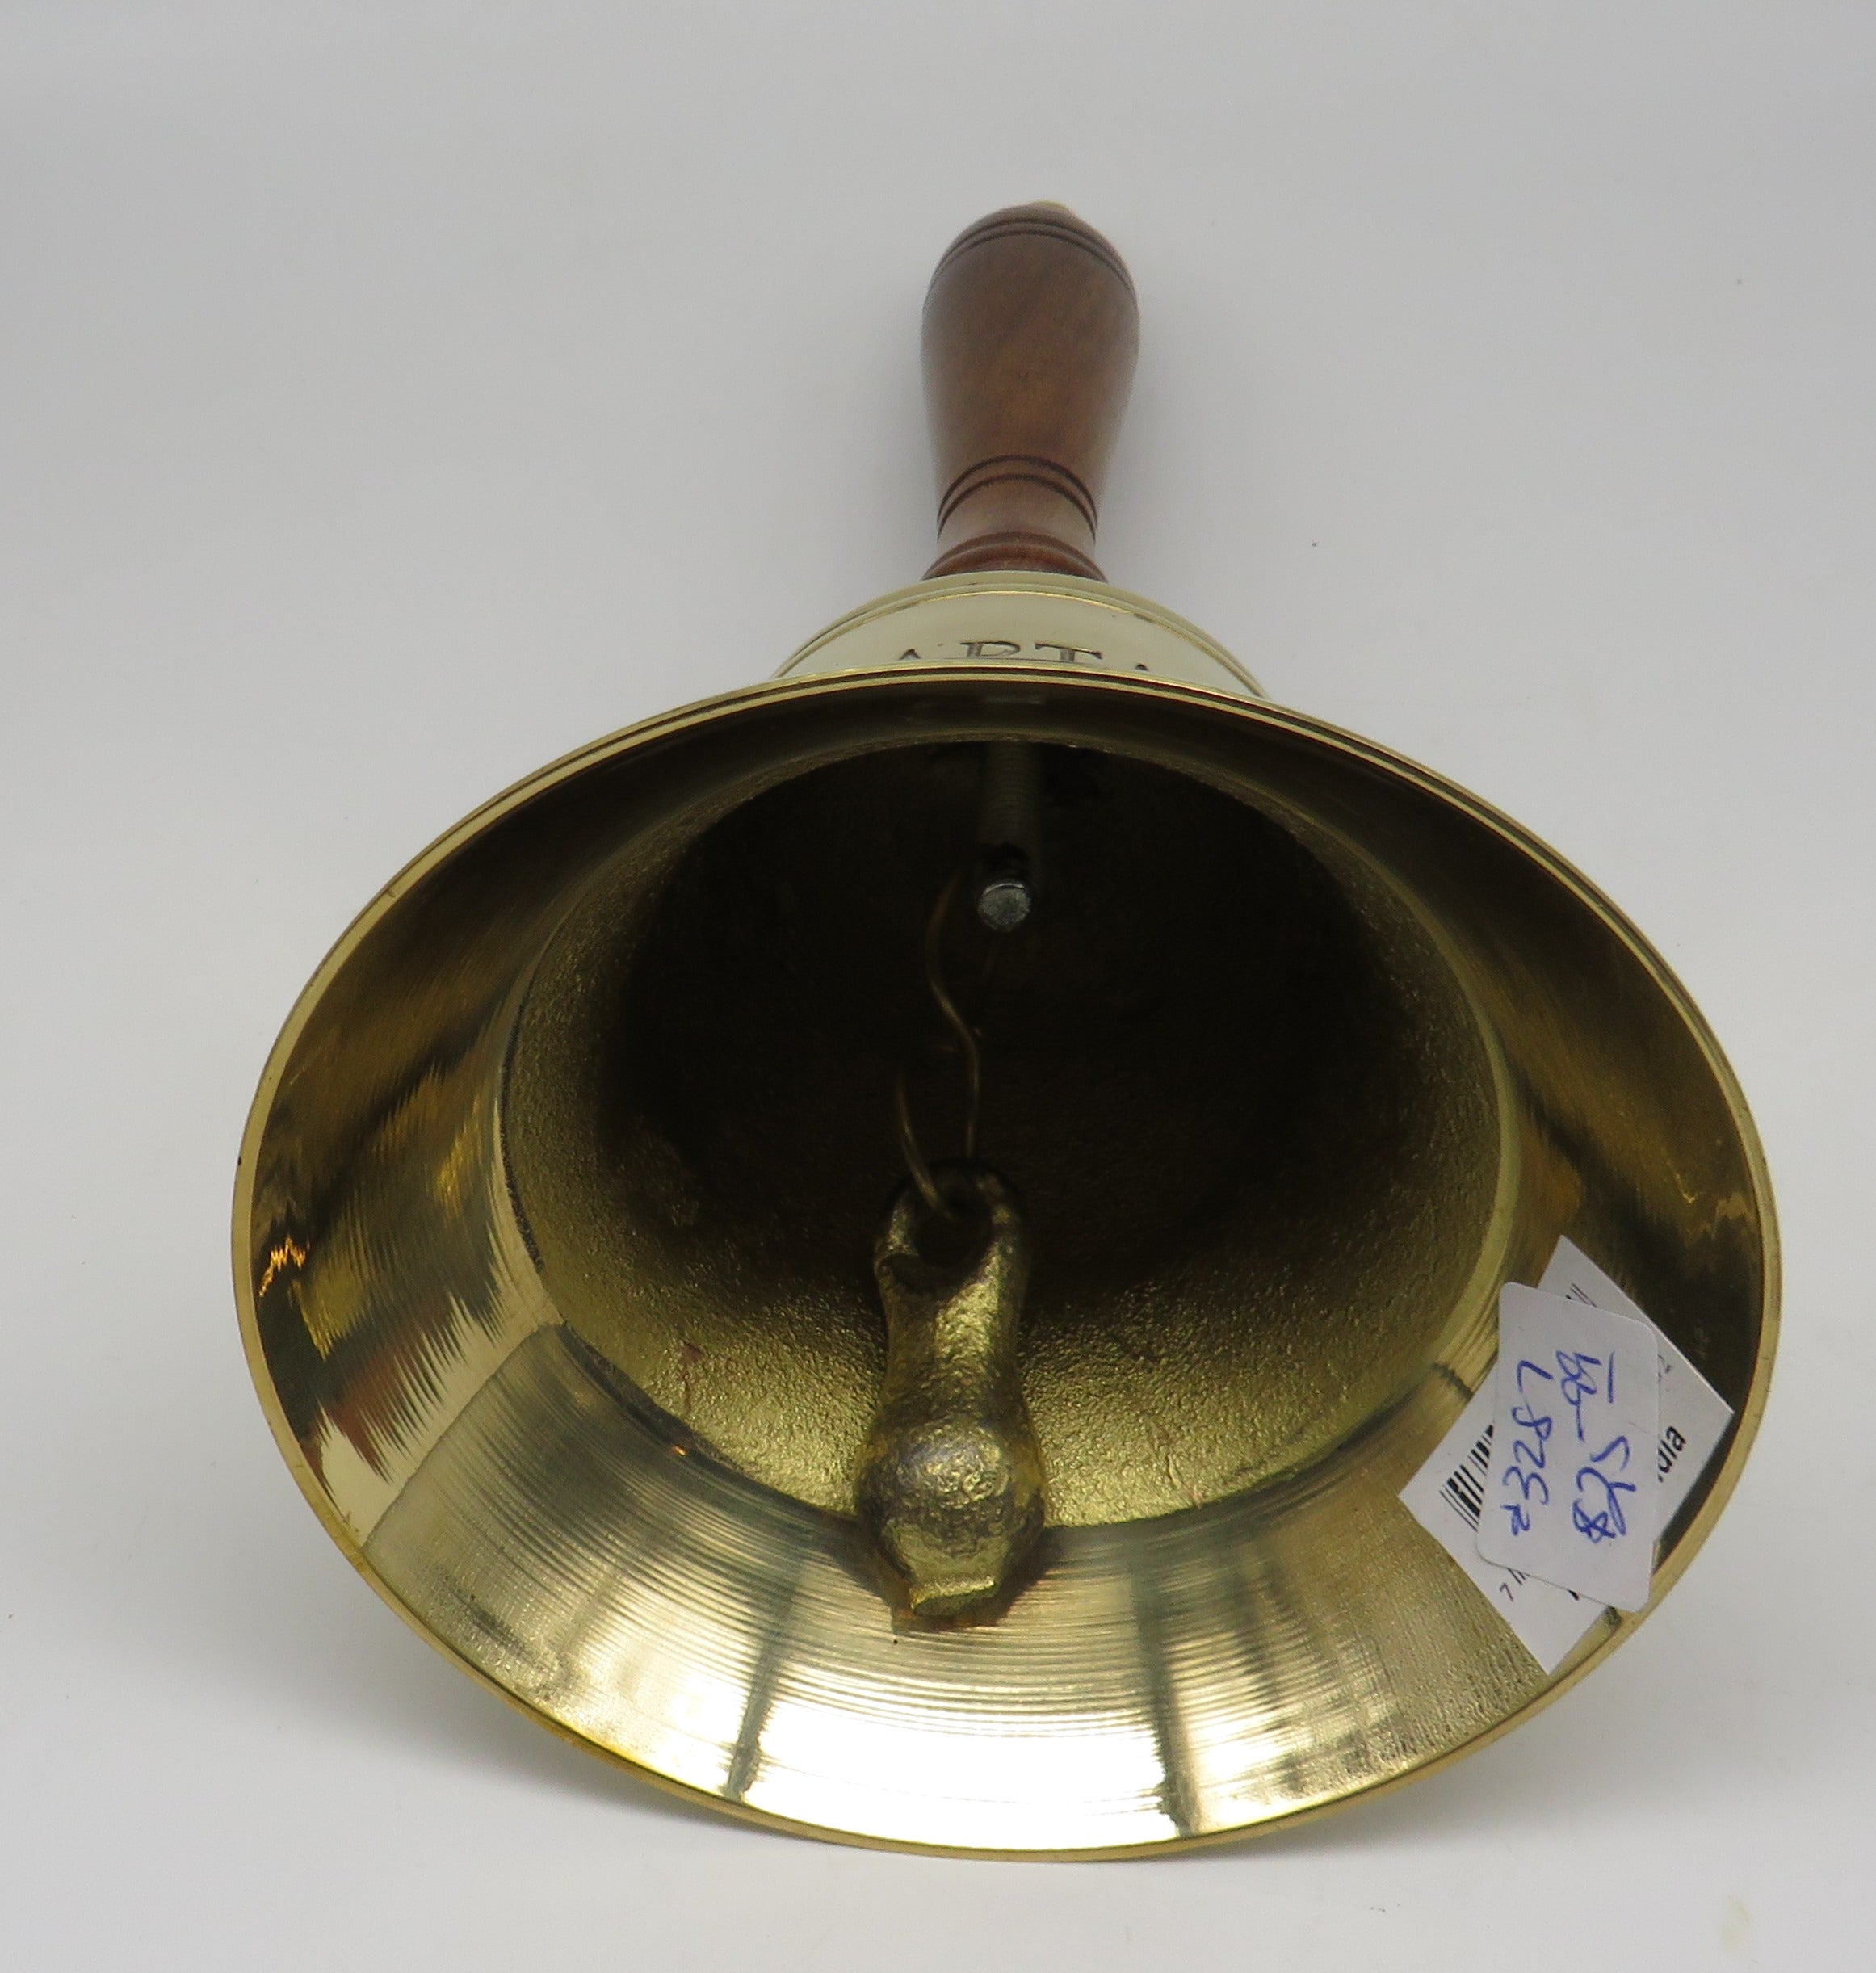 Nautical Brass Captain's Table Bell [Large]